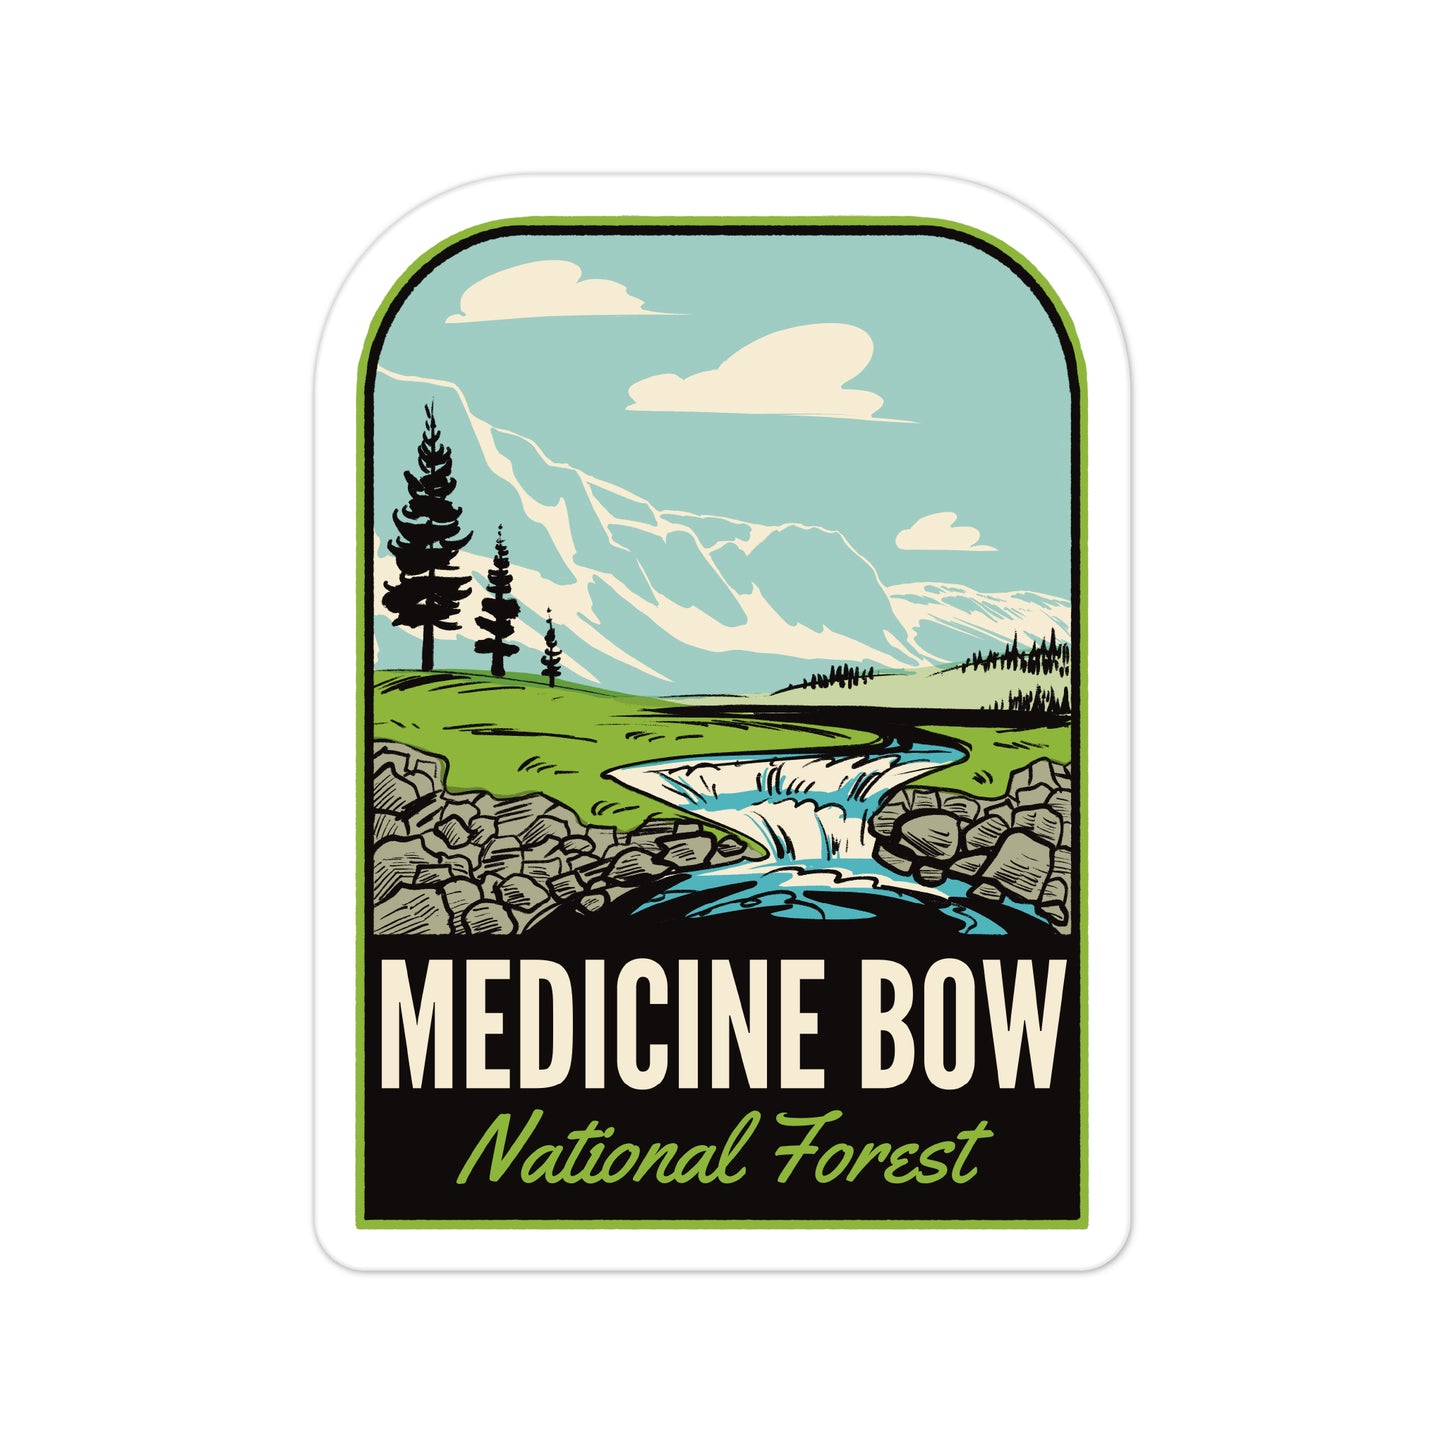 A sticker of Medicine Bow National Forest